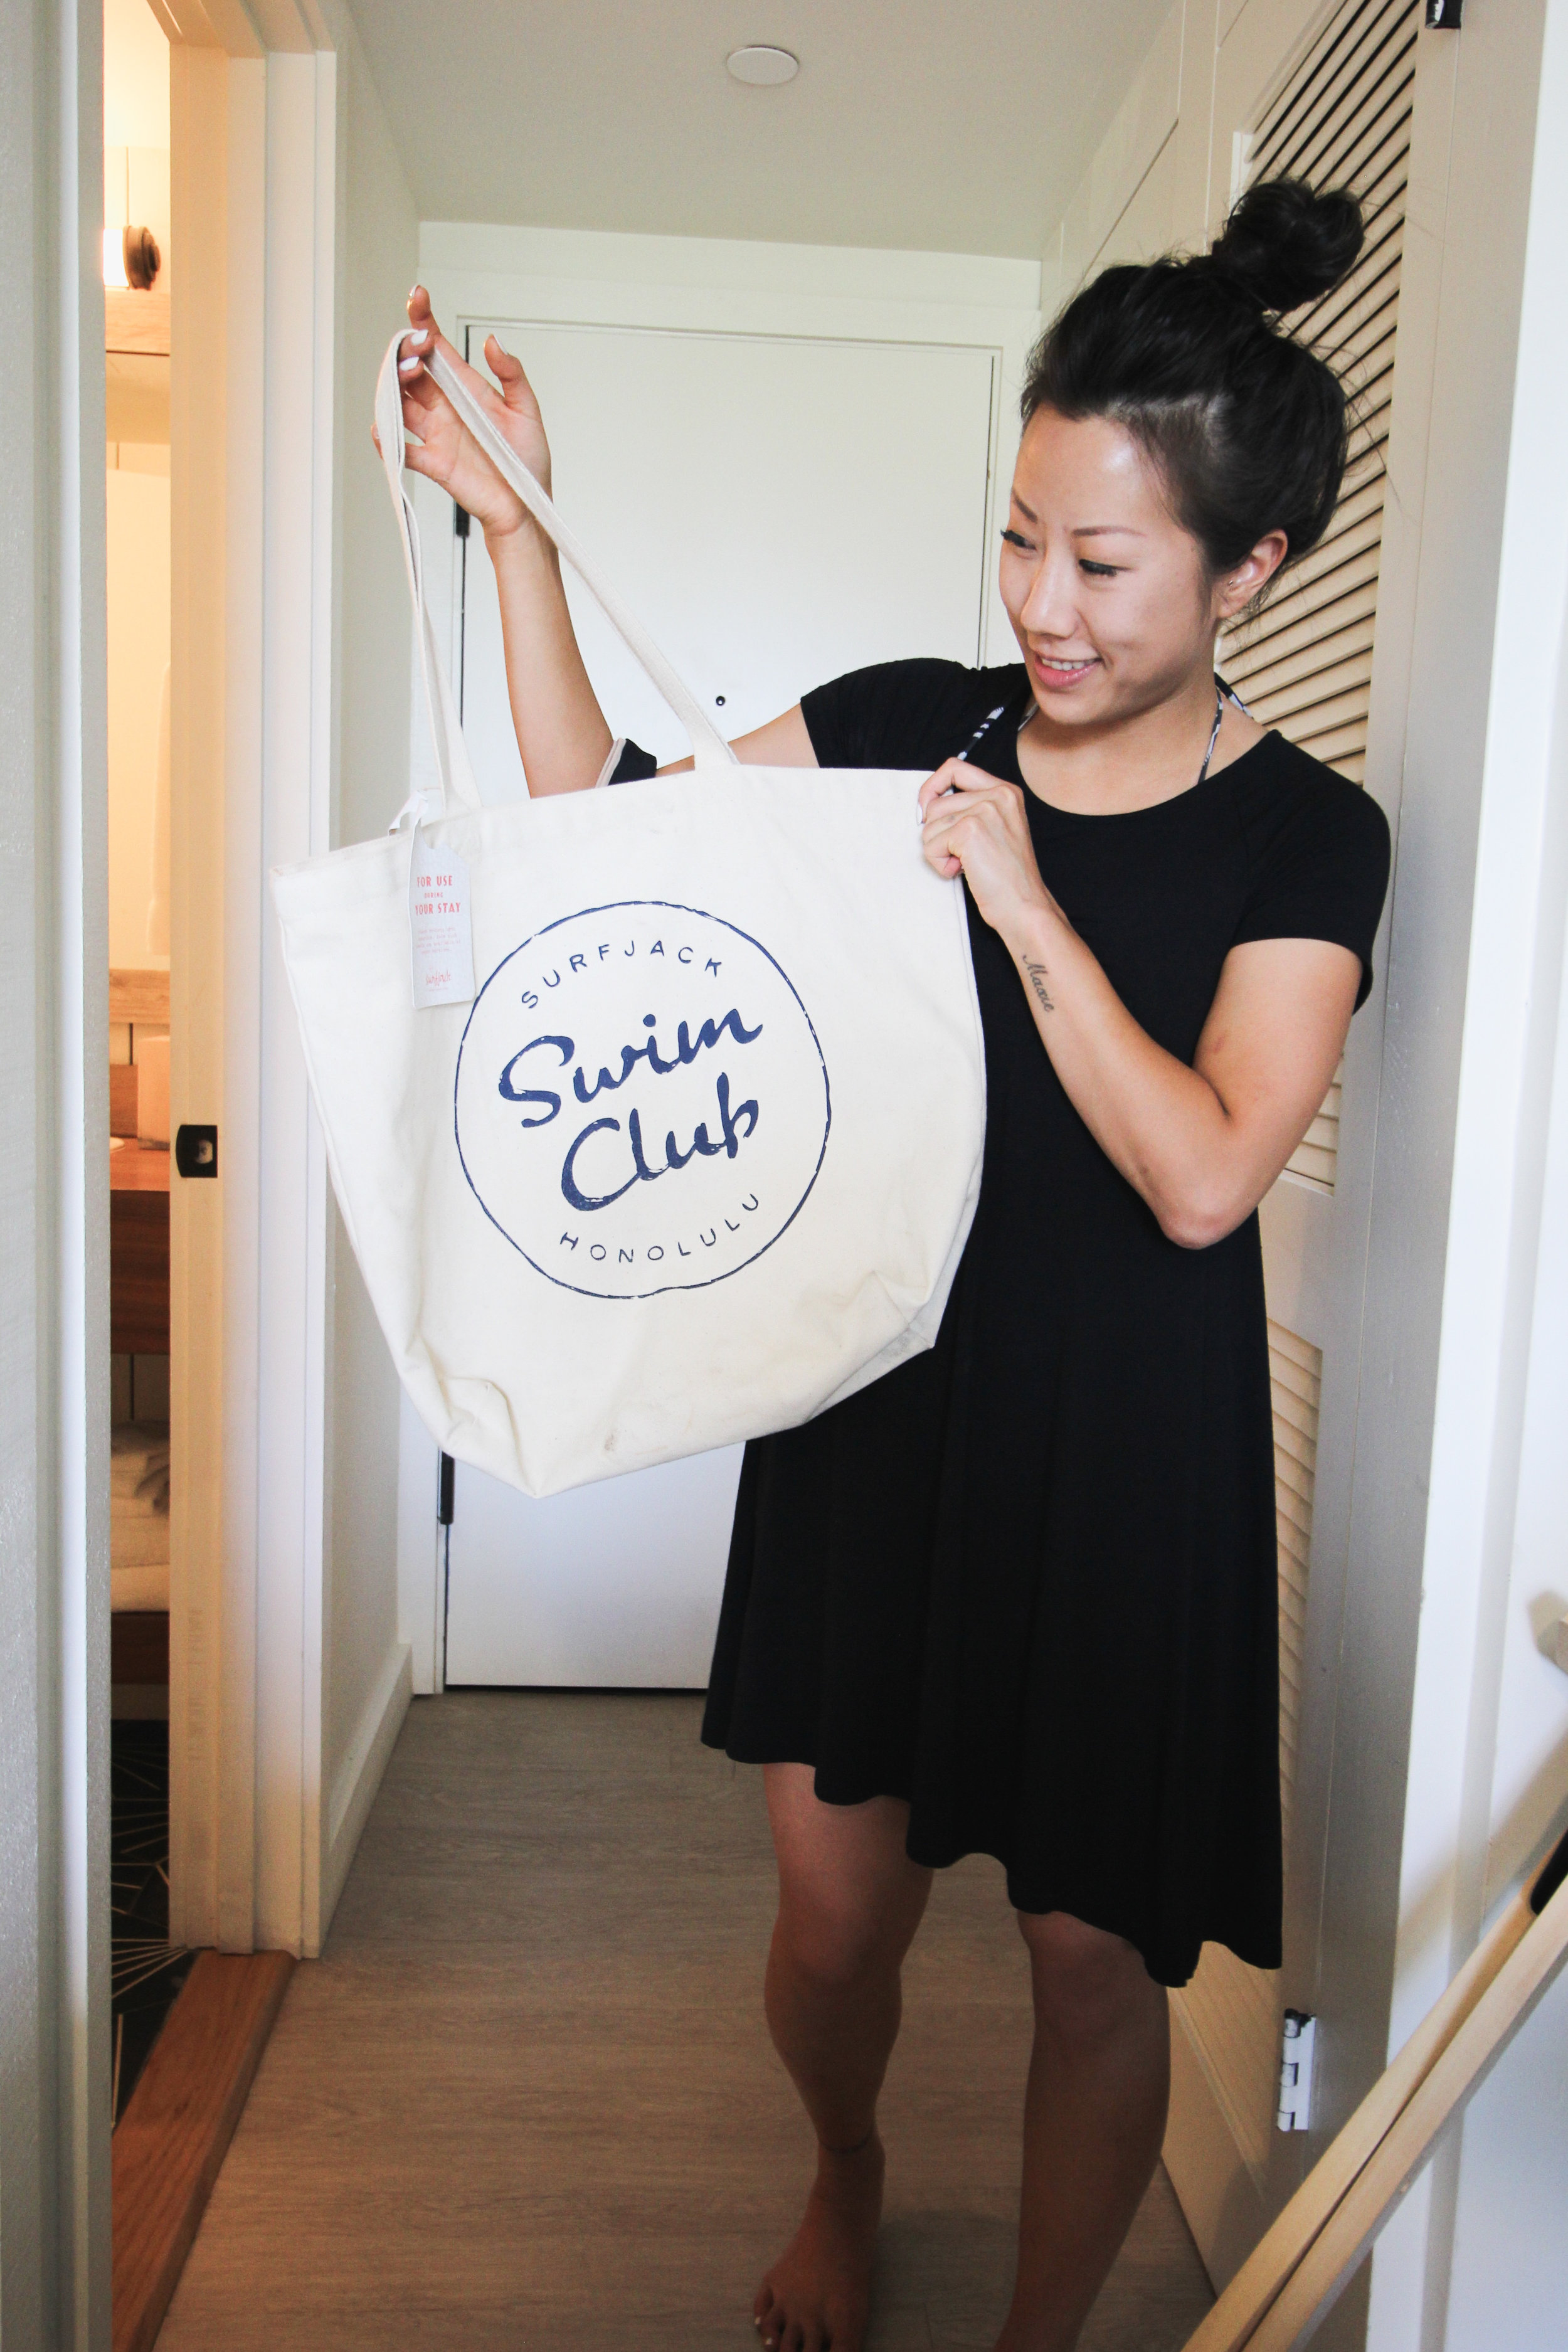 Laura with our Surfjack Swim Club tote